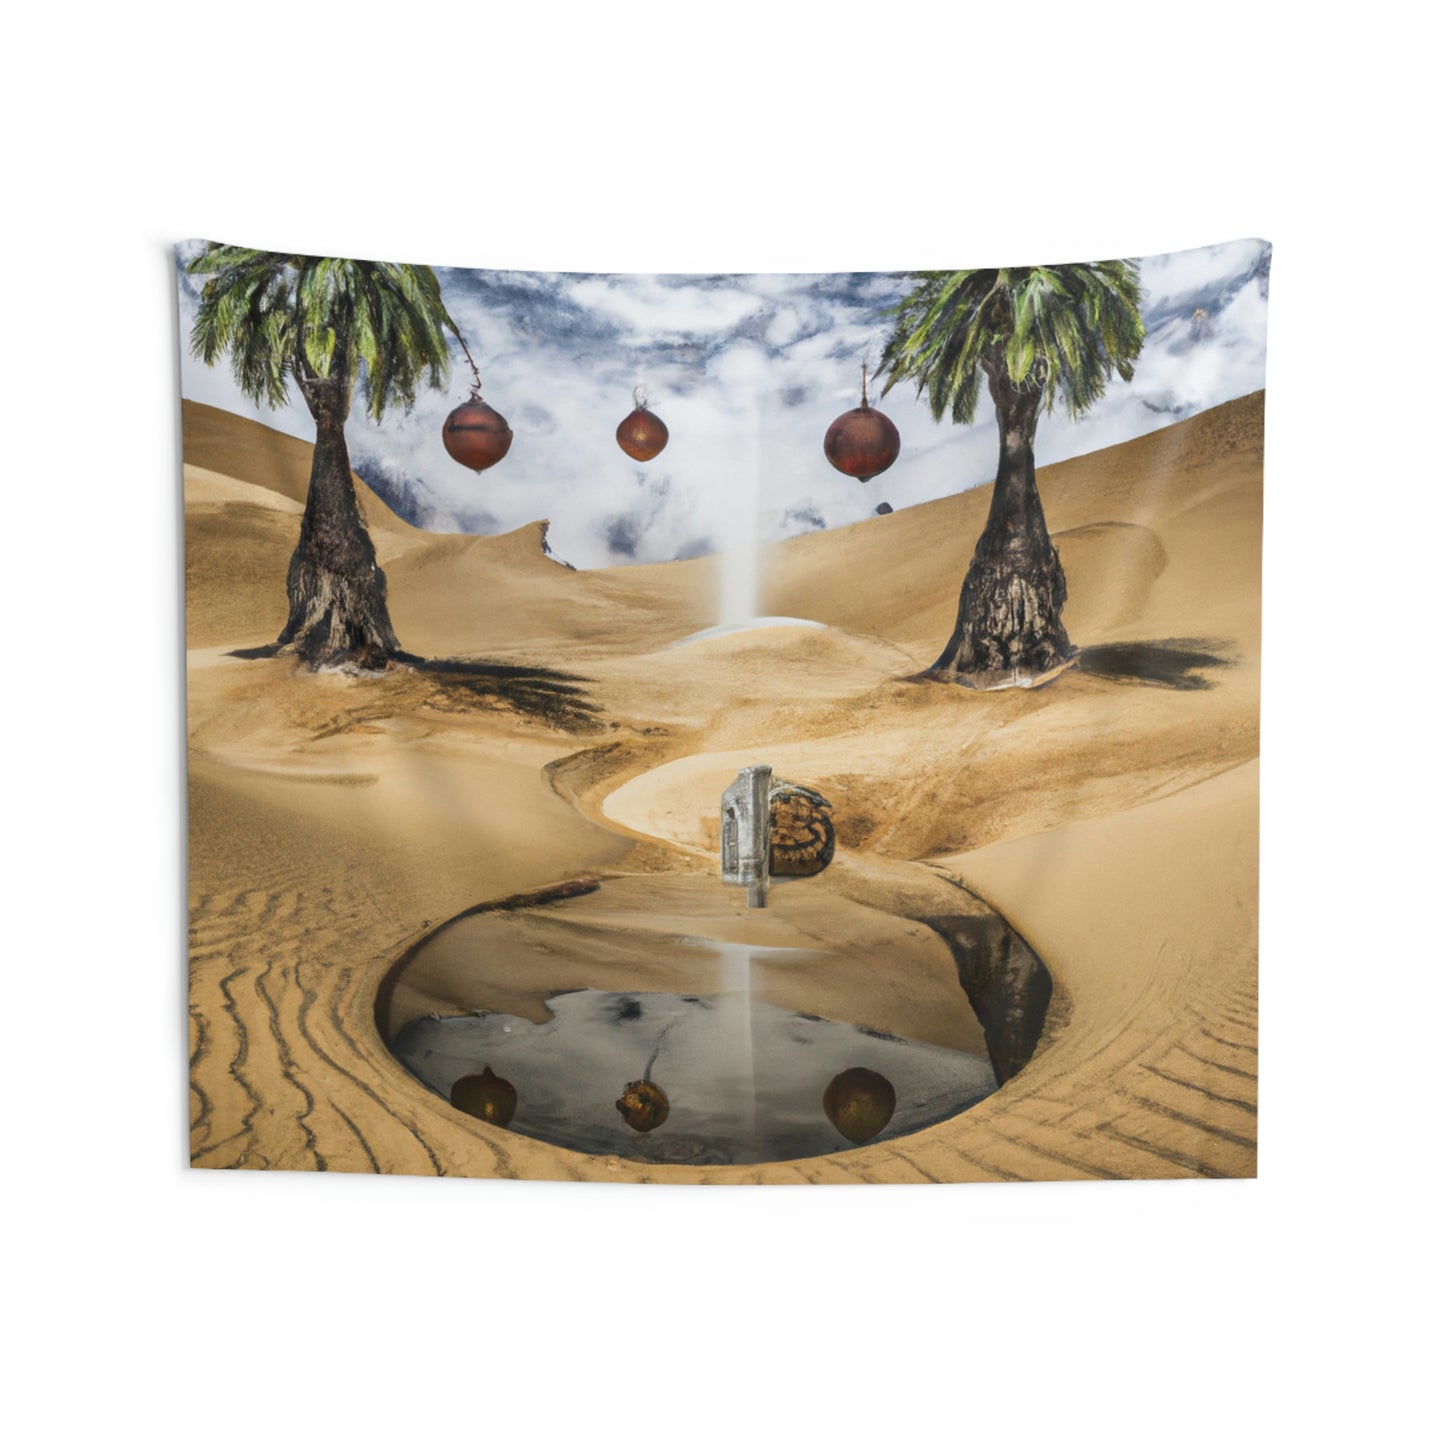 The Mirage of the Desert Sands - The Alien Wall Tapestries